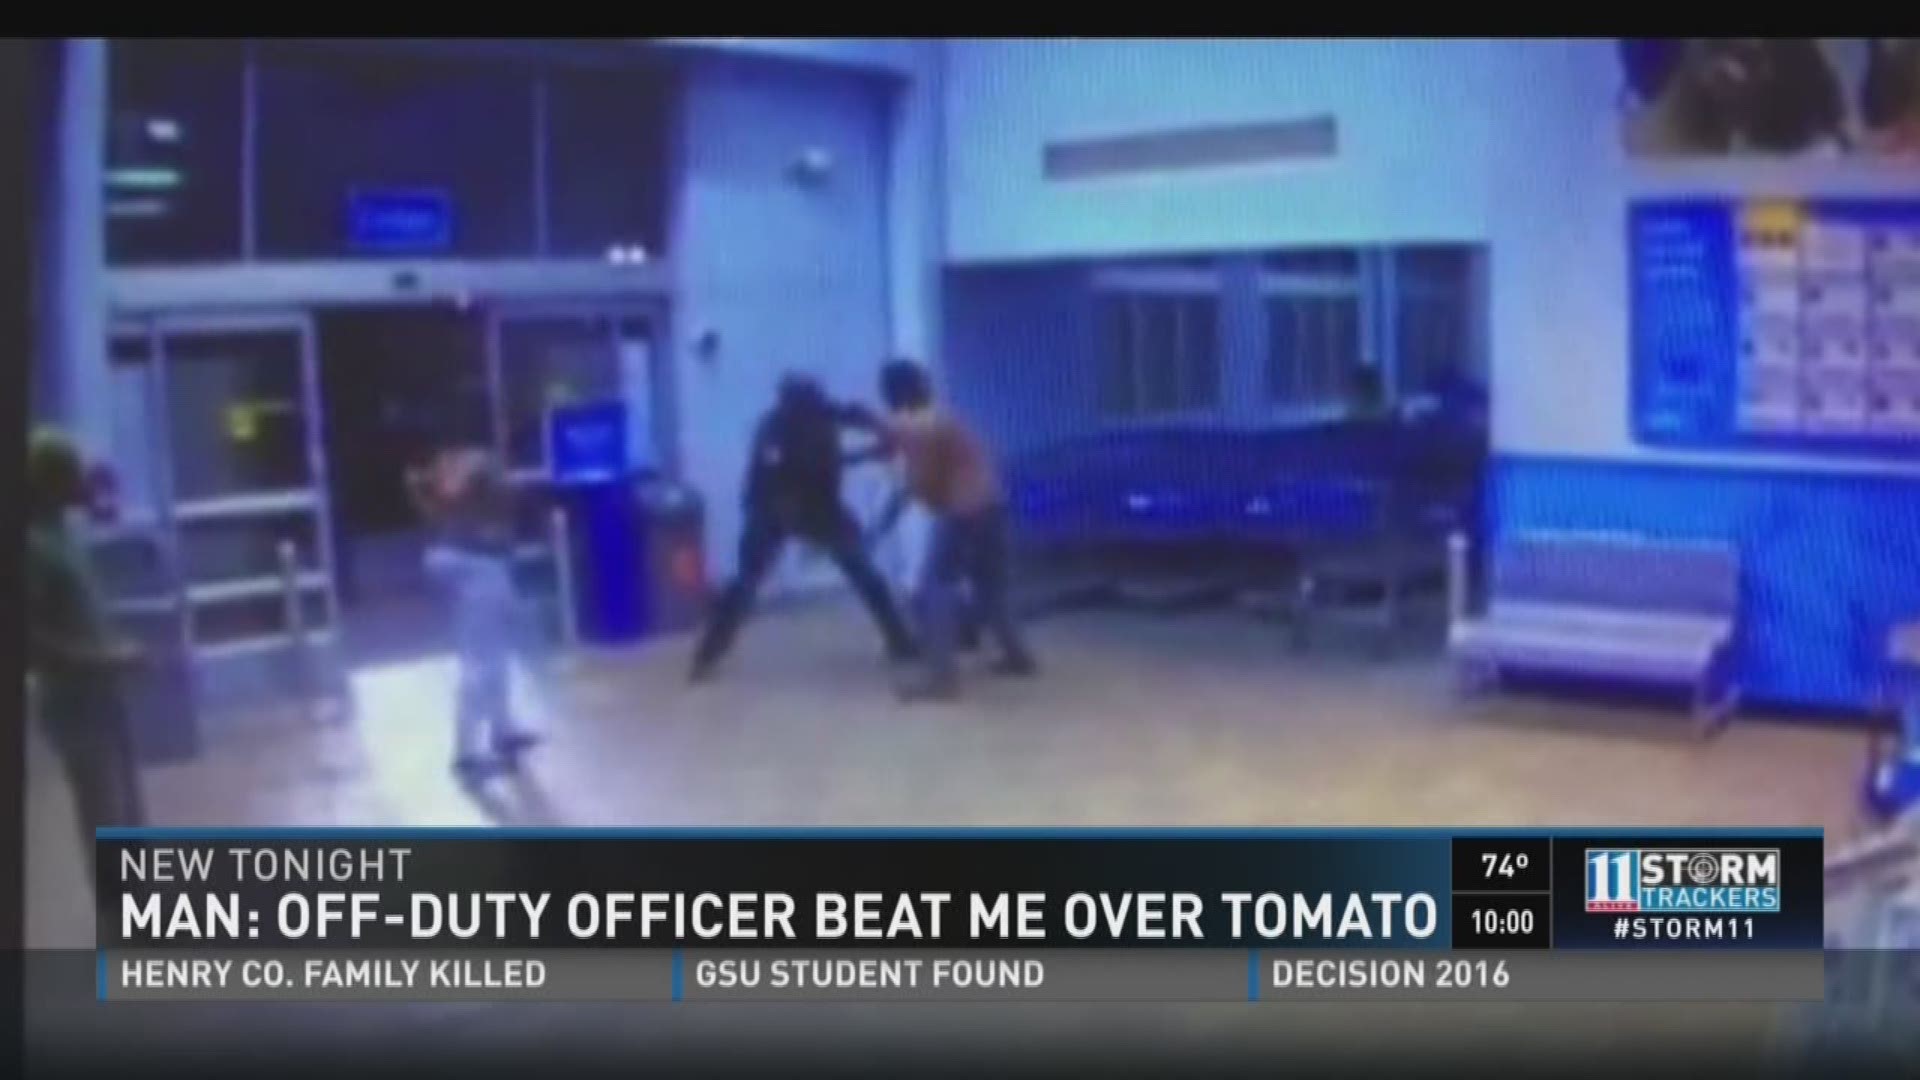 Man: off-duty officer beat me over a tomato